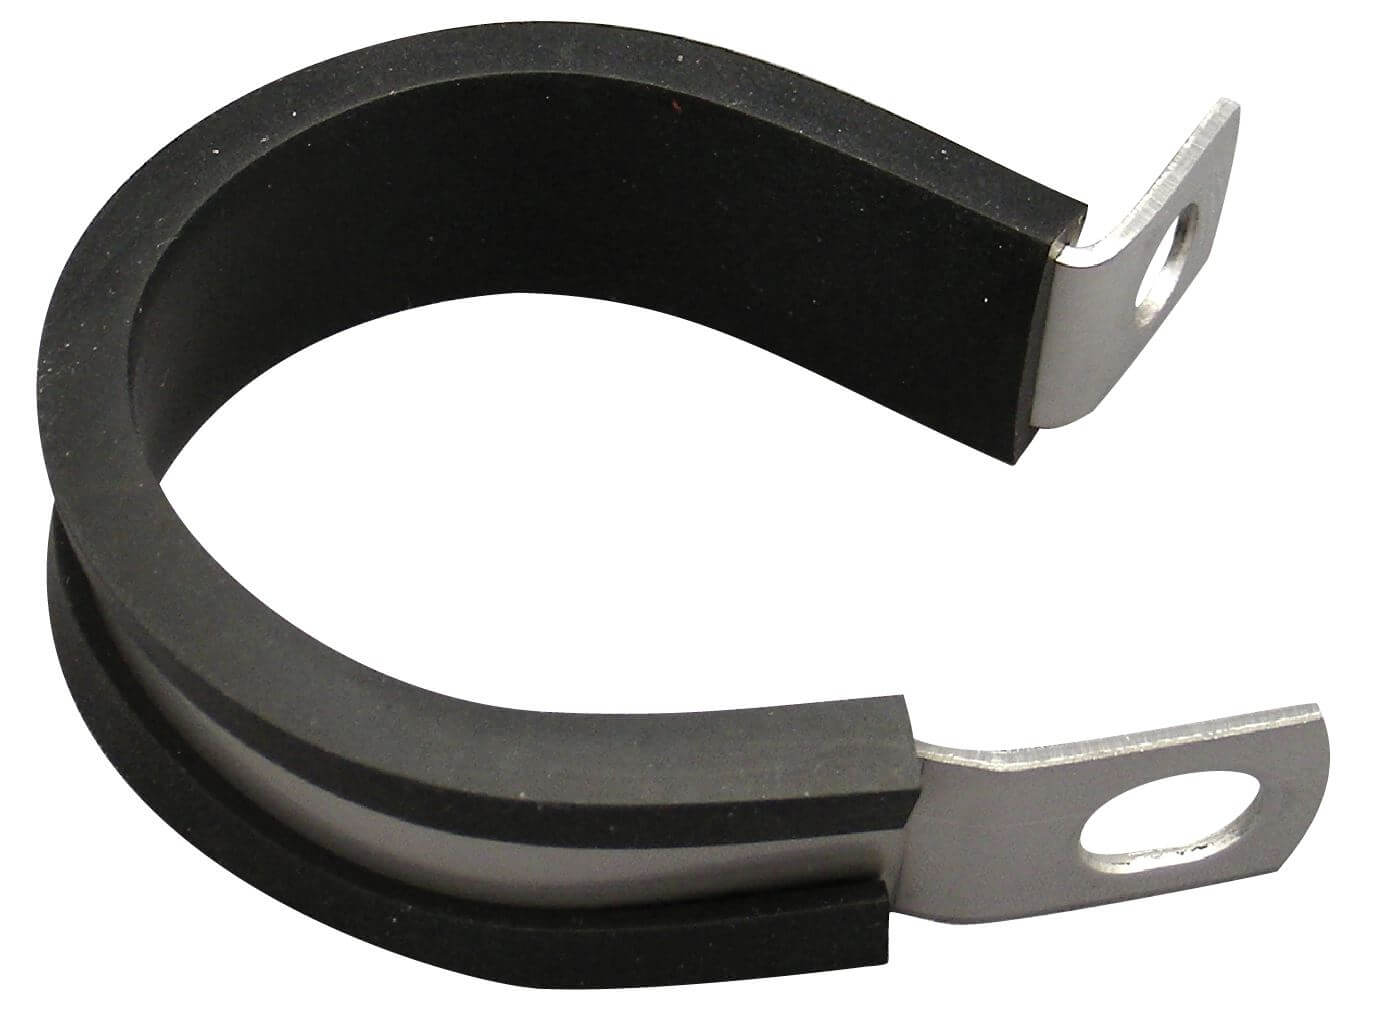 1/2" 304 SS CLAMP/ VULC RUBBER INSERT 1/4" HOLE